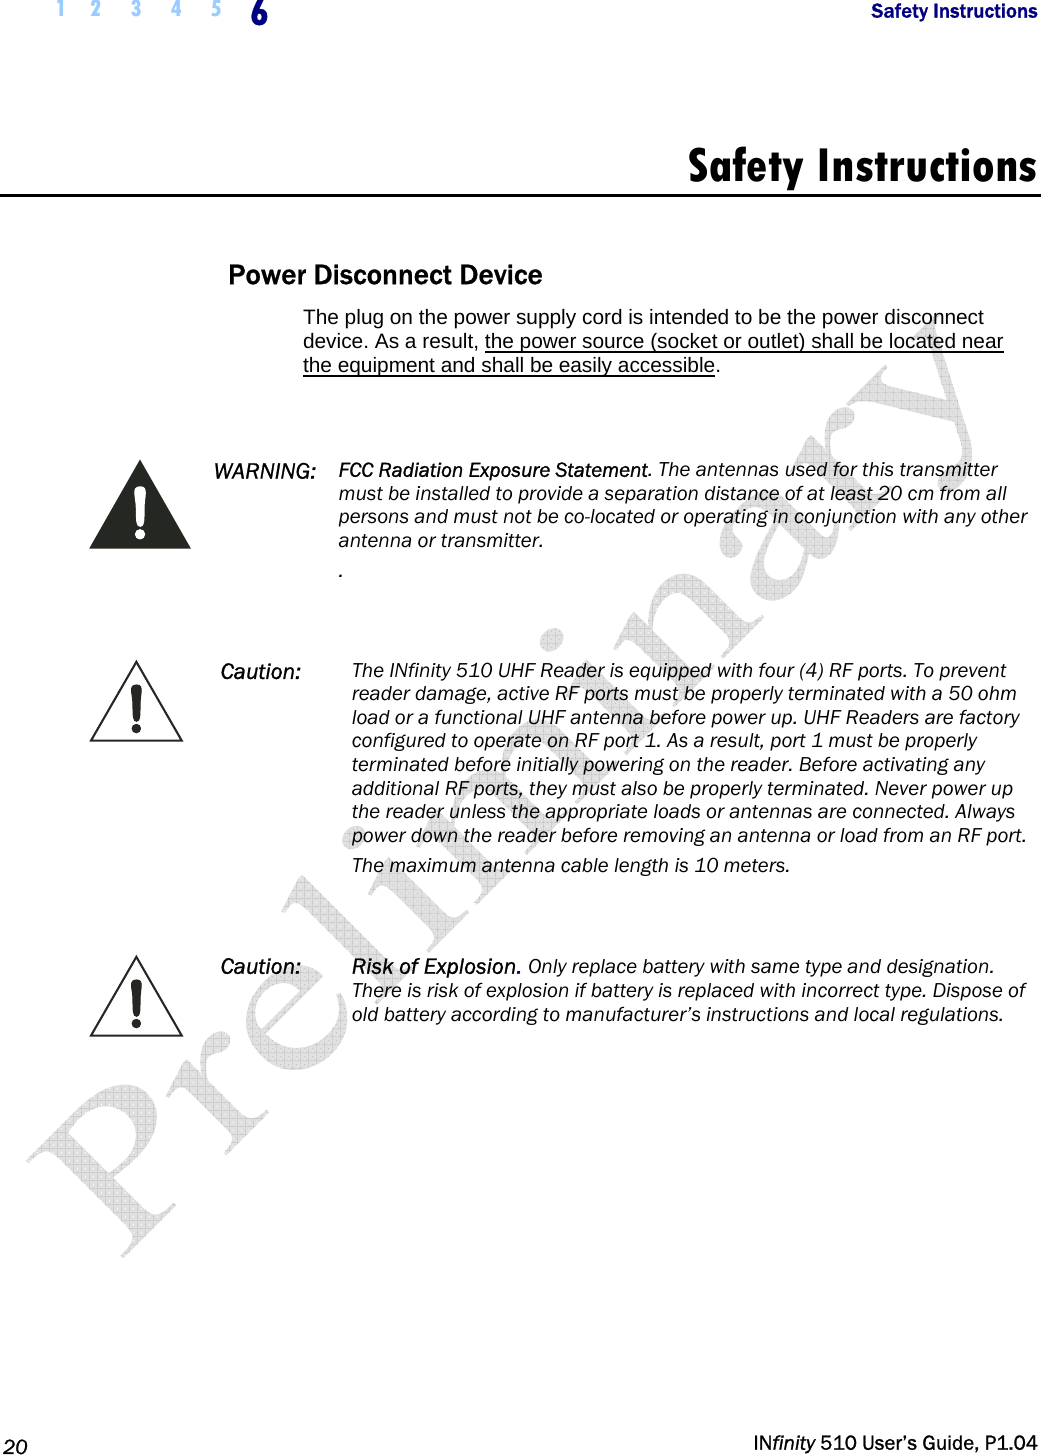  1 2  3  4  5  6            Safety Instructions   20   INfinity 510 User’s Guide, P1.04  Safety Instructions  Power Disconnect Device The plug on the power supply cord is intended to be the power disconnect device. As a result, the power source (socket or outlet) shall be located near the equipment and shall be easily accessible.    WARNING:  FCC Radiation Exposure Statement. The antennas used for this transmitter must be installed to provide a separation distance of at least 20 cm from all persons and must not be co-located or operating in conjunction with any other antenna or transmitter. .   Caution:  The INfinity 510 UHF Reader is equipped with four (4) RF ports. To prevent reader damage, active RF ports must be properly terminated with a 50 ohm load or a functional UHF antenna before power up. UHF Readers are factory configured to operate on RF port 1. As a result, port 1 must be properly terminated before initially powering on the reader. Before activating any additional RF ports, they must also be properly terminated. Never power up the reader unless the appropriate loads or antennas are connected. Always power down the reader before removing an antenna or load from an RF port. The maximum antenna cable length is 10 meters.   Caution: Risk of Explosion. Only replace battery with same type and designation. There is risk of explosion if battery is replaced with incorrect type. Dispose of old battery according to manufacturer’s instructions and local regulations.      